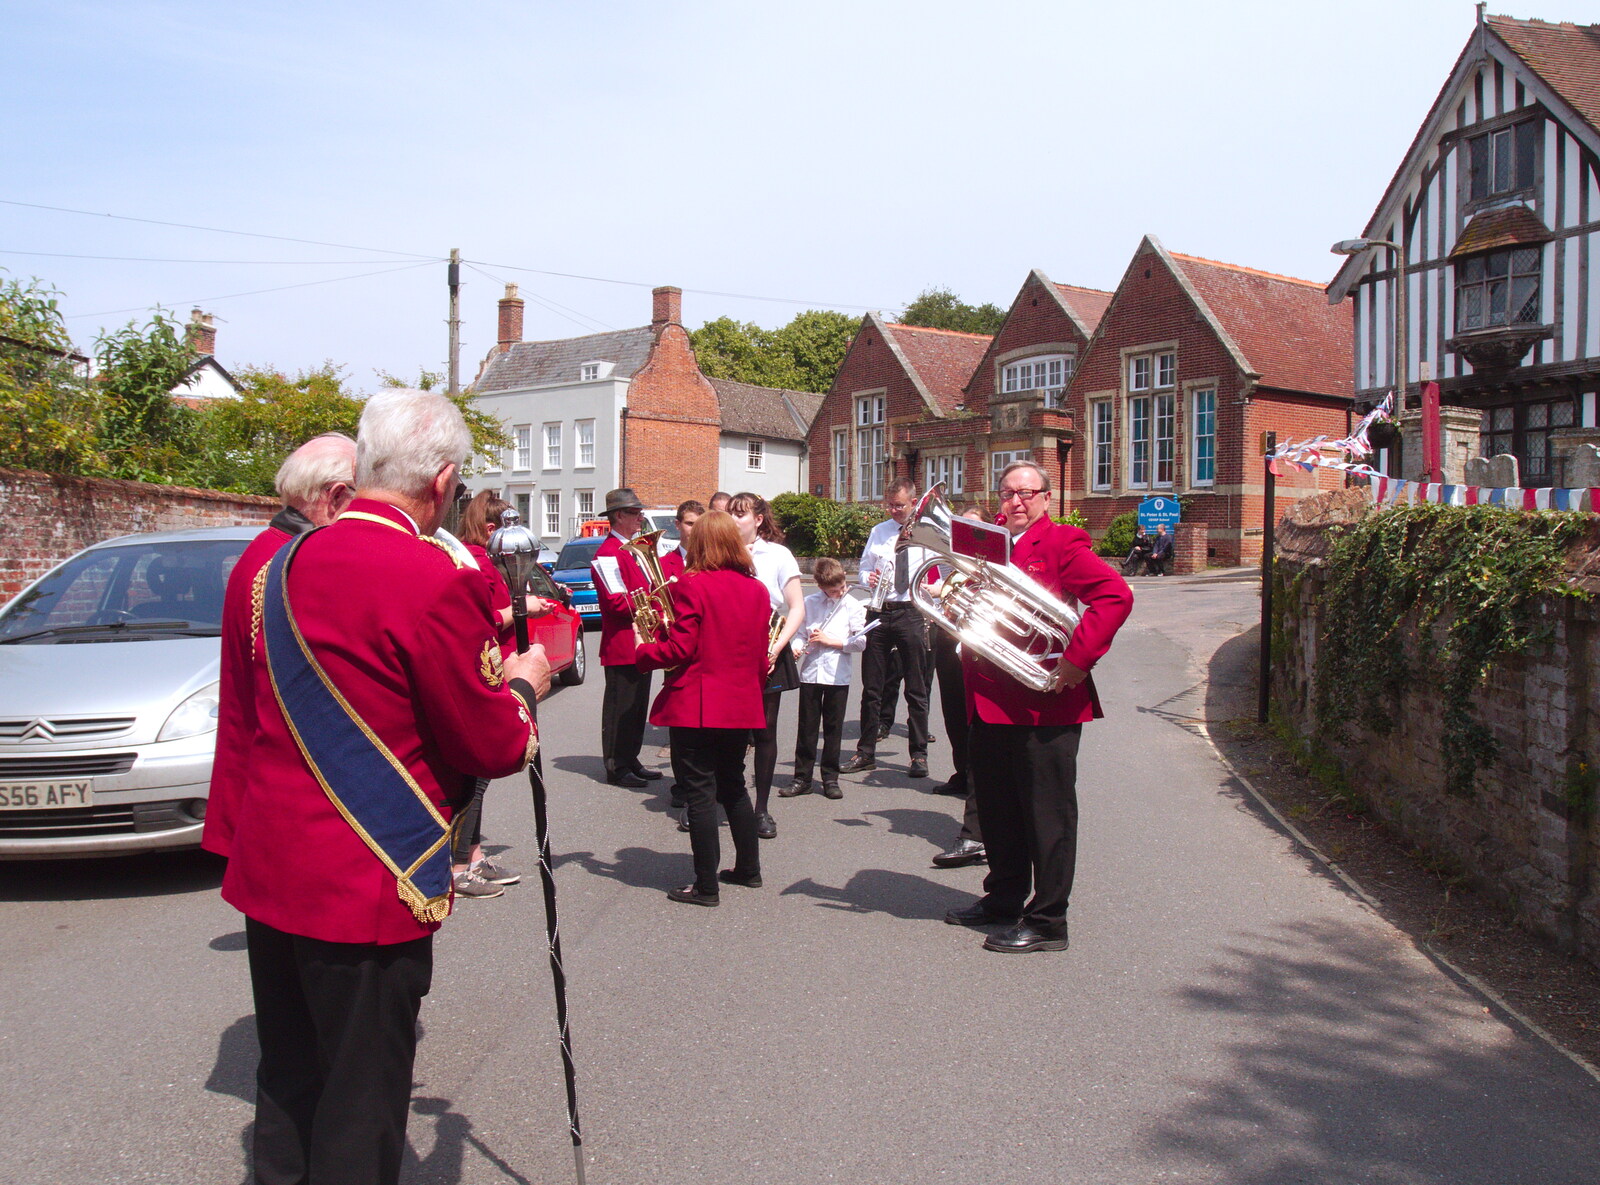 Julian with his shiny bass from The BSCC at North Lopham, and the GSB Mayor's Parade, Eye, Suffolk - 23rd June 2019